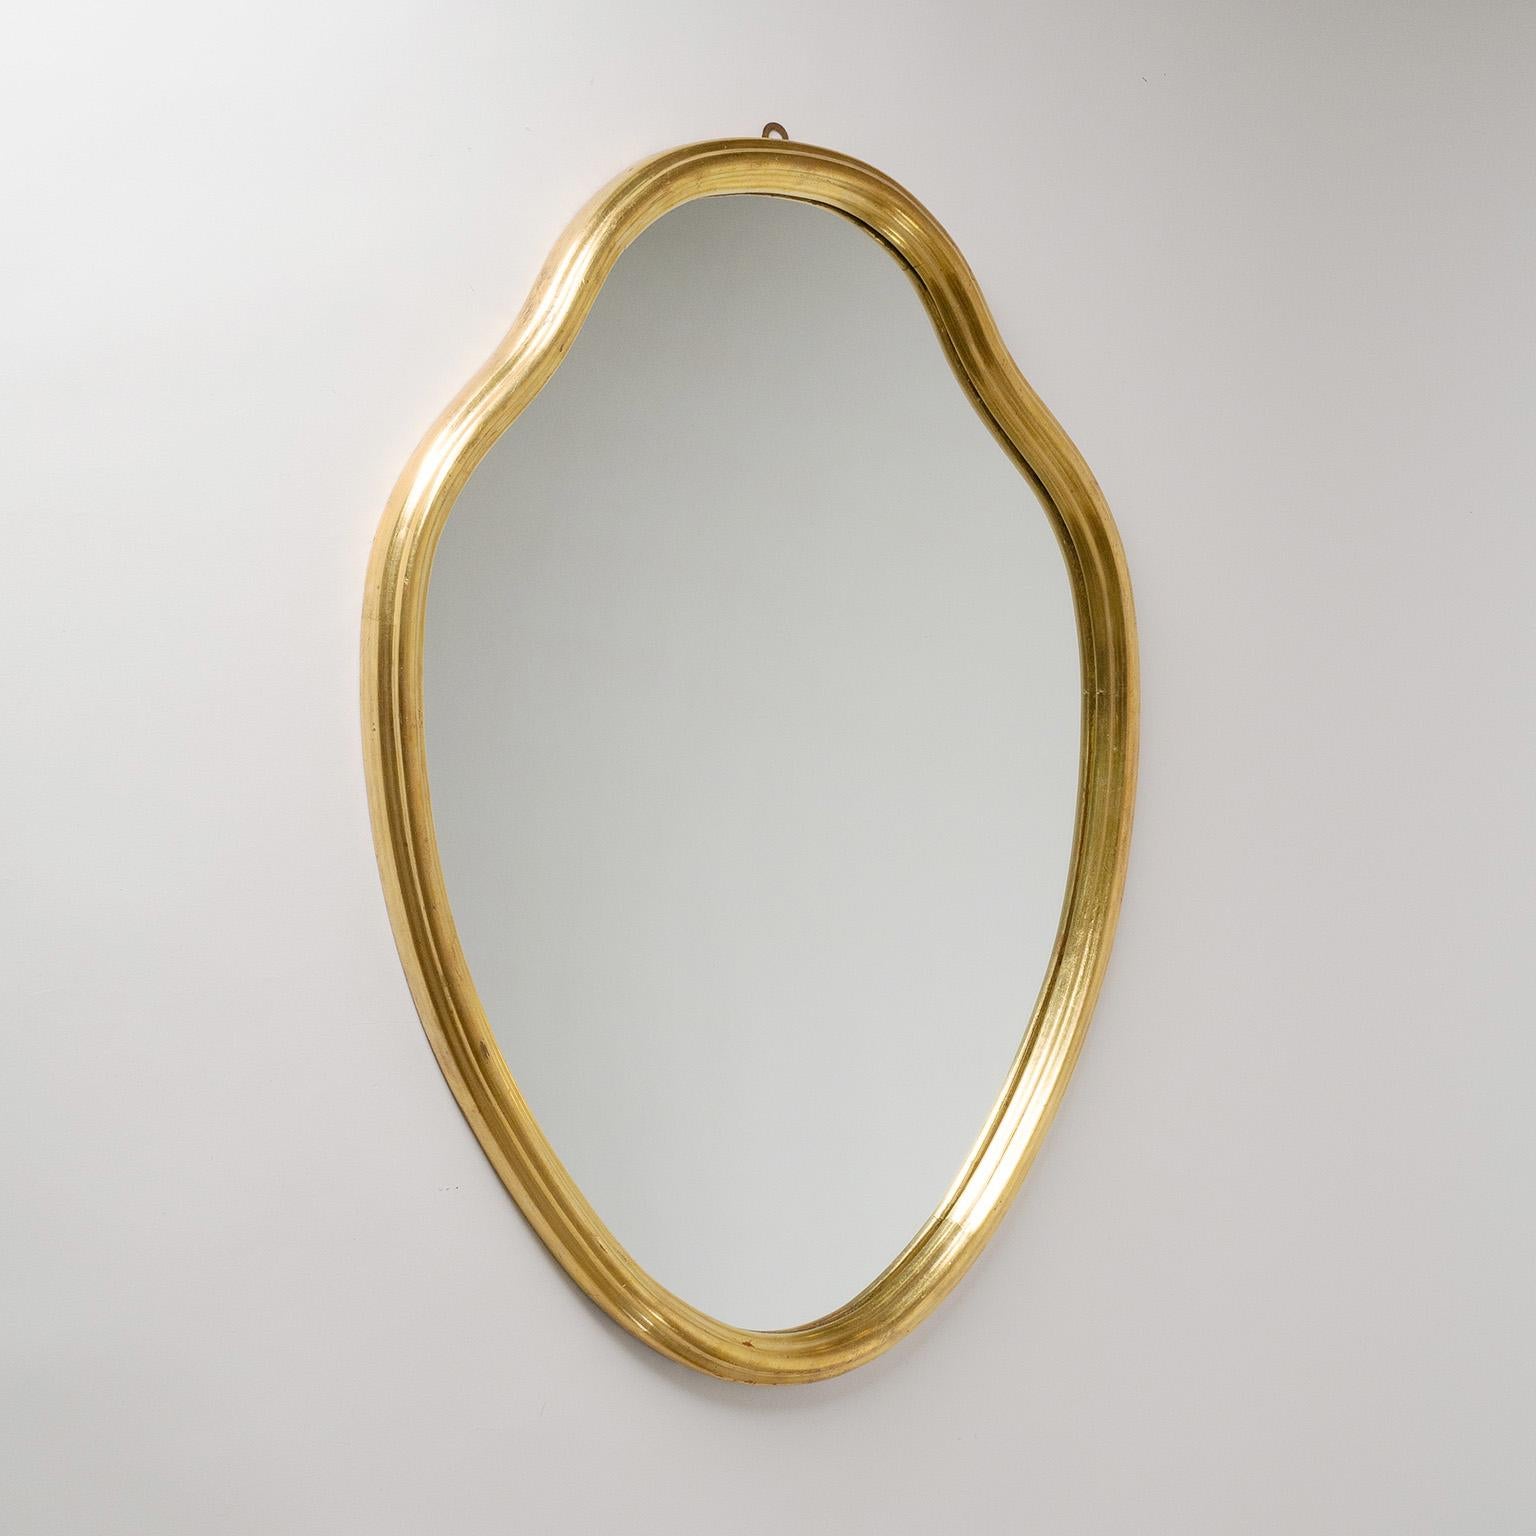 Fine Italian giltwood mirror from the 1940s. Very nicely profiled carved wood frame with leaf gold and new backplate.